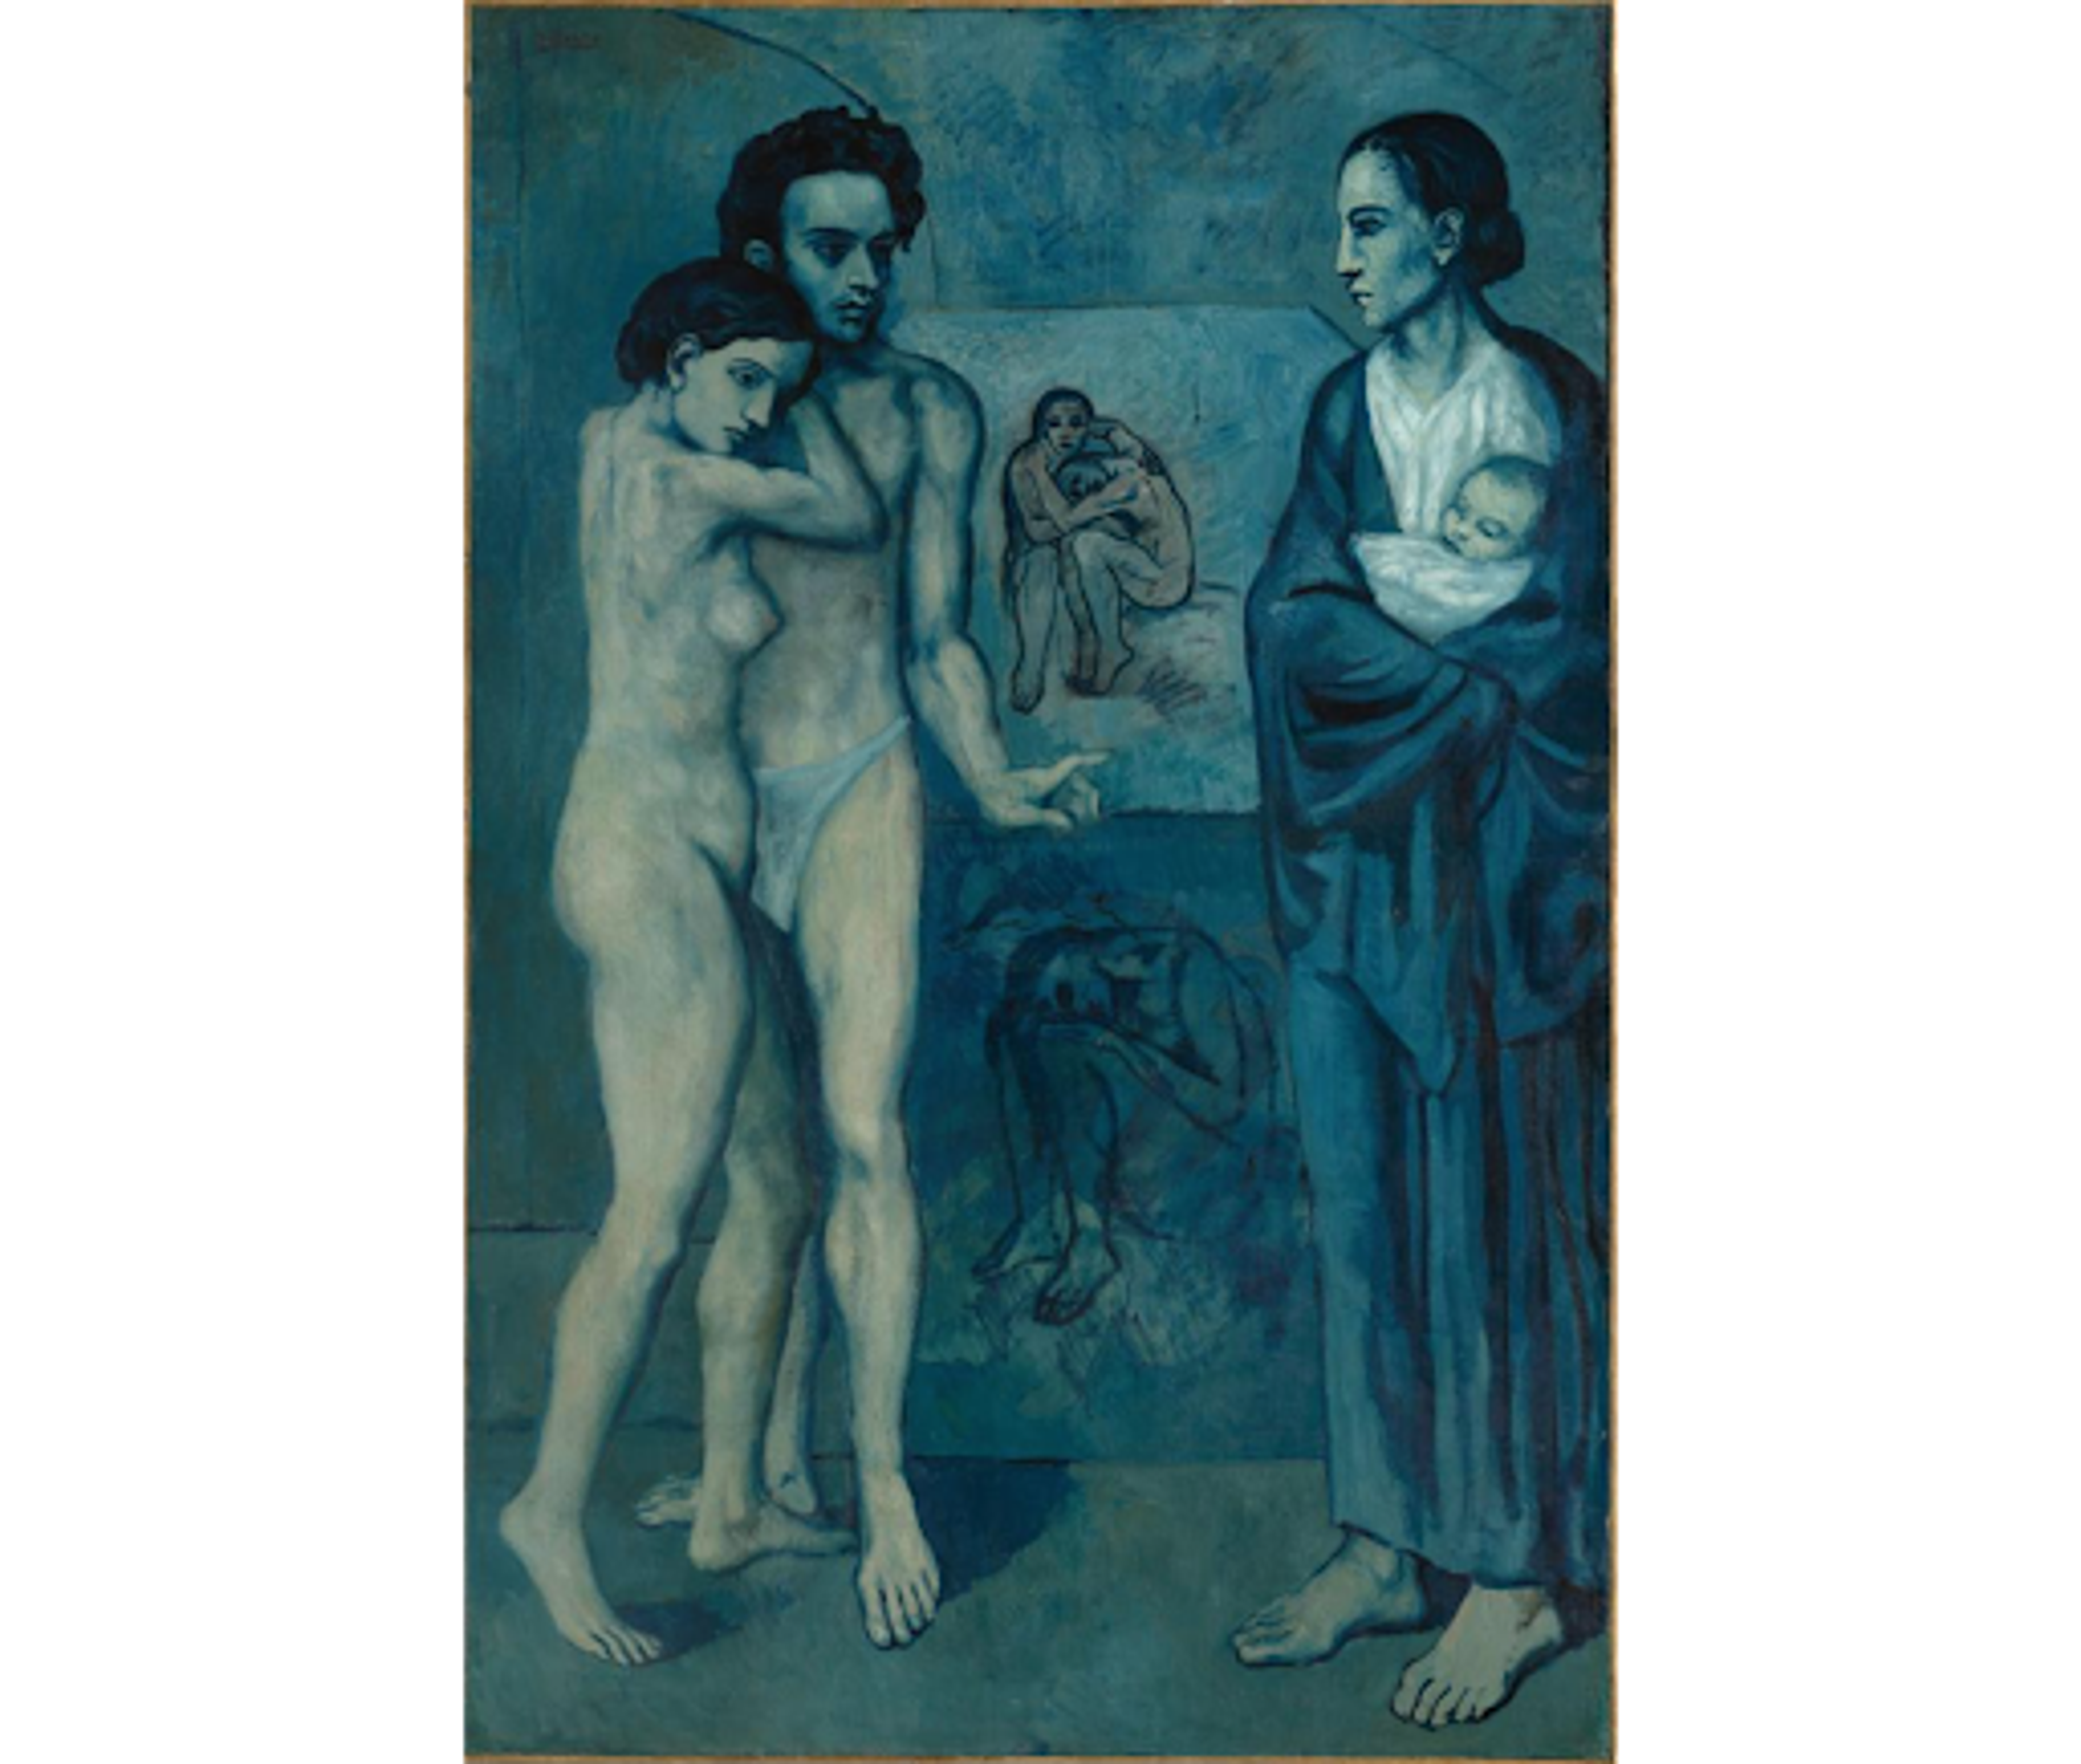 Pablo Picasso's La Vie. A Blue Period painting of an unclothed couple on the left and a woman holding a baby on the right with two artworks in the background. 